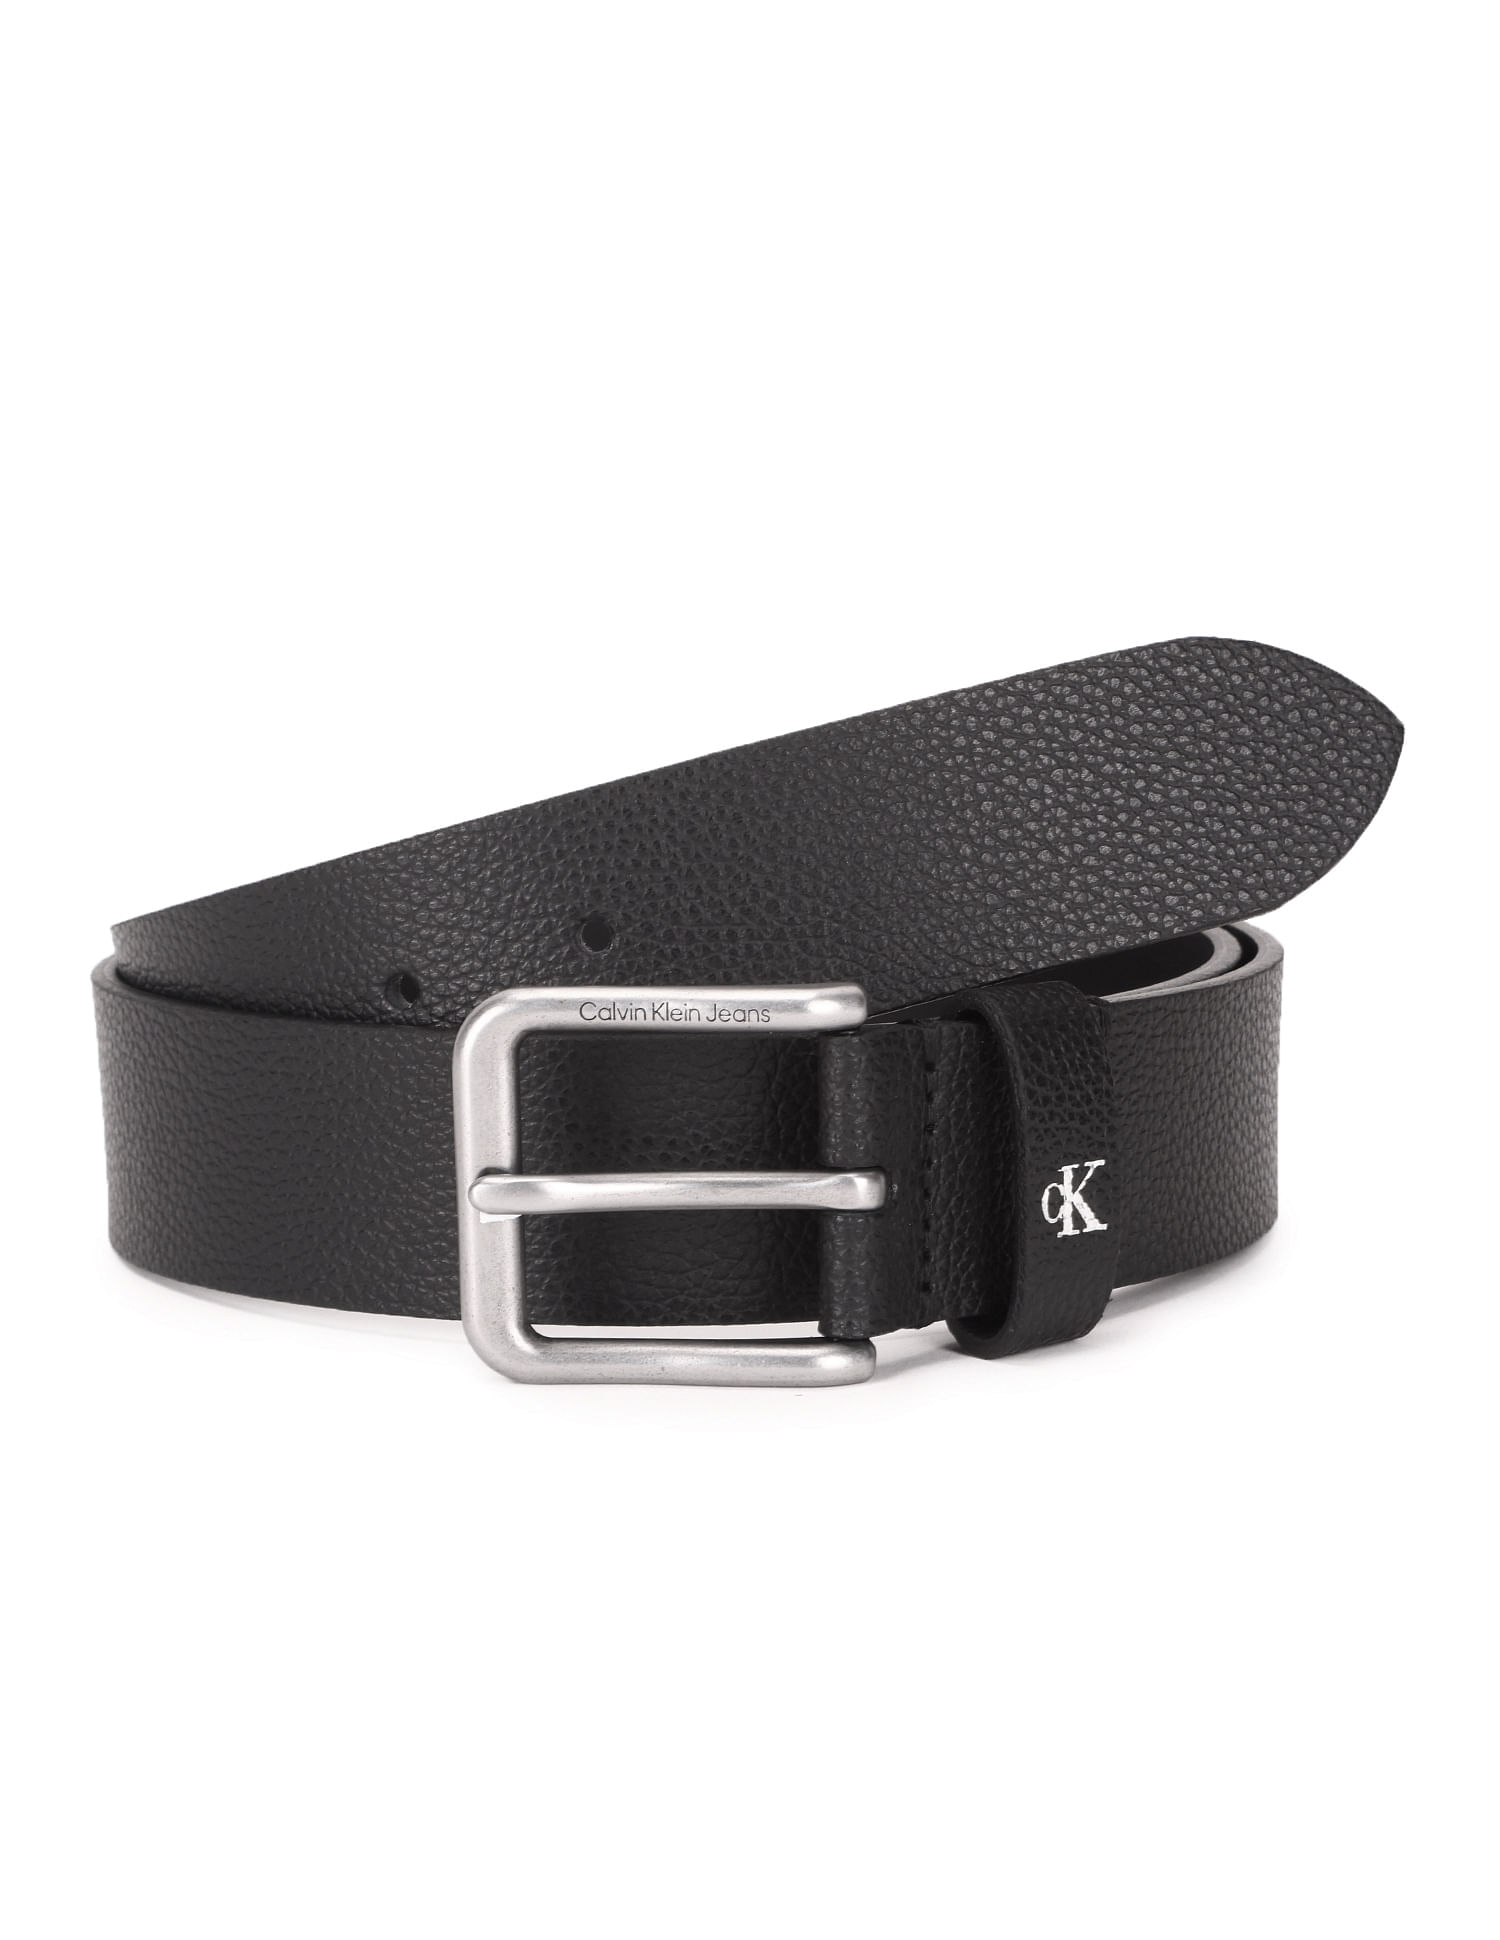 Buy Calvin Klein Round Jeans Classic Leather Belt